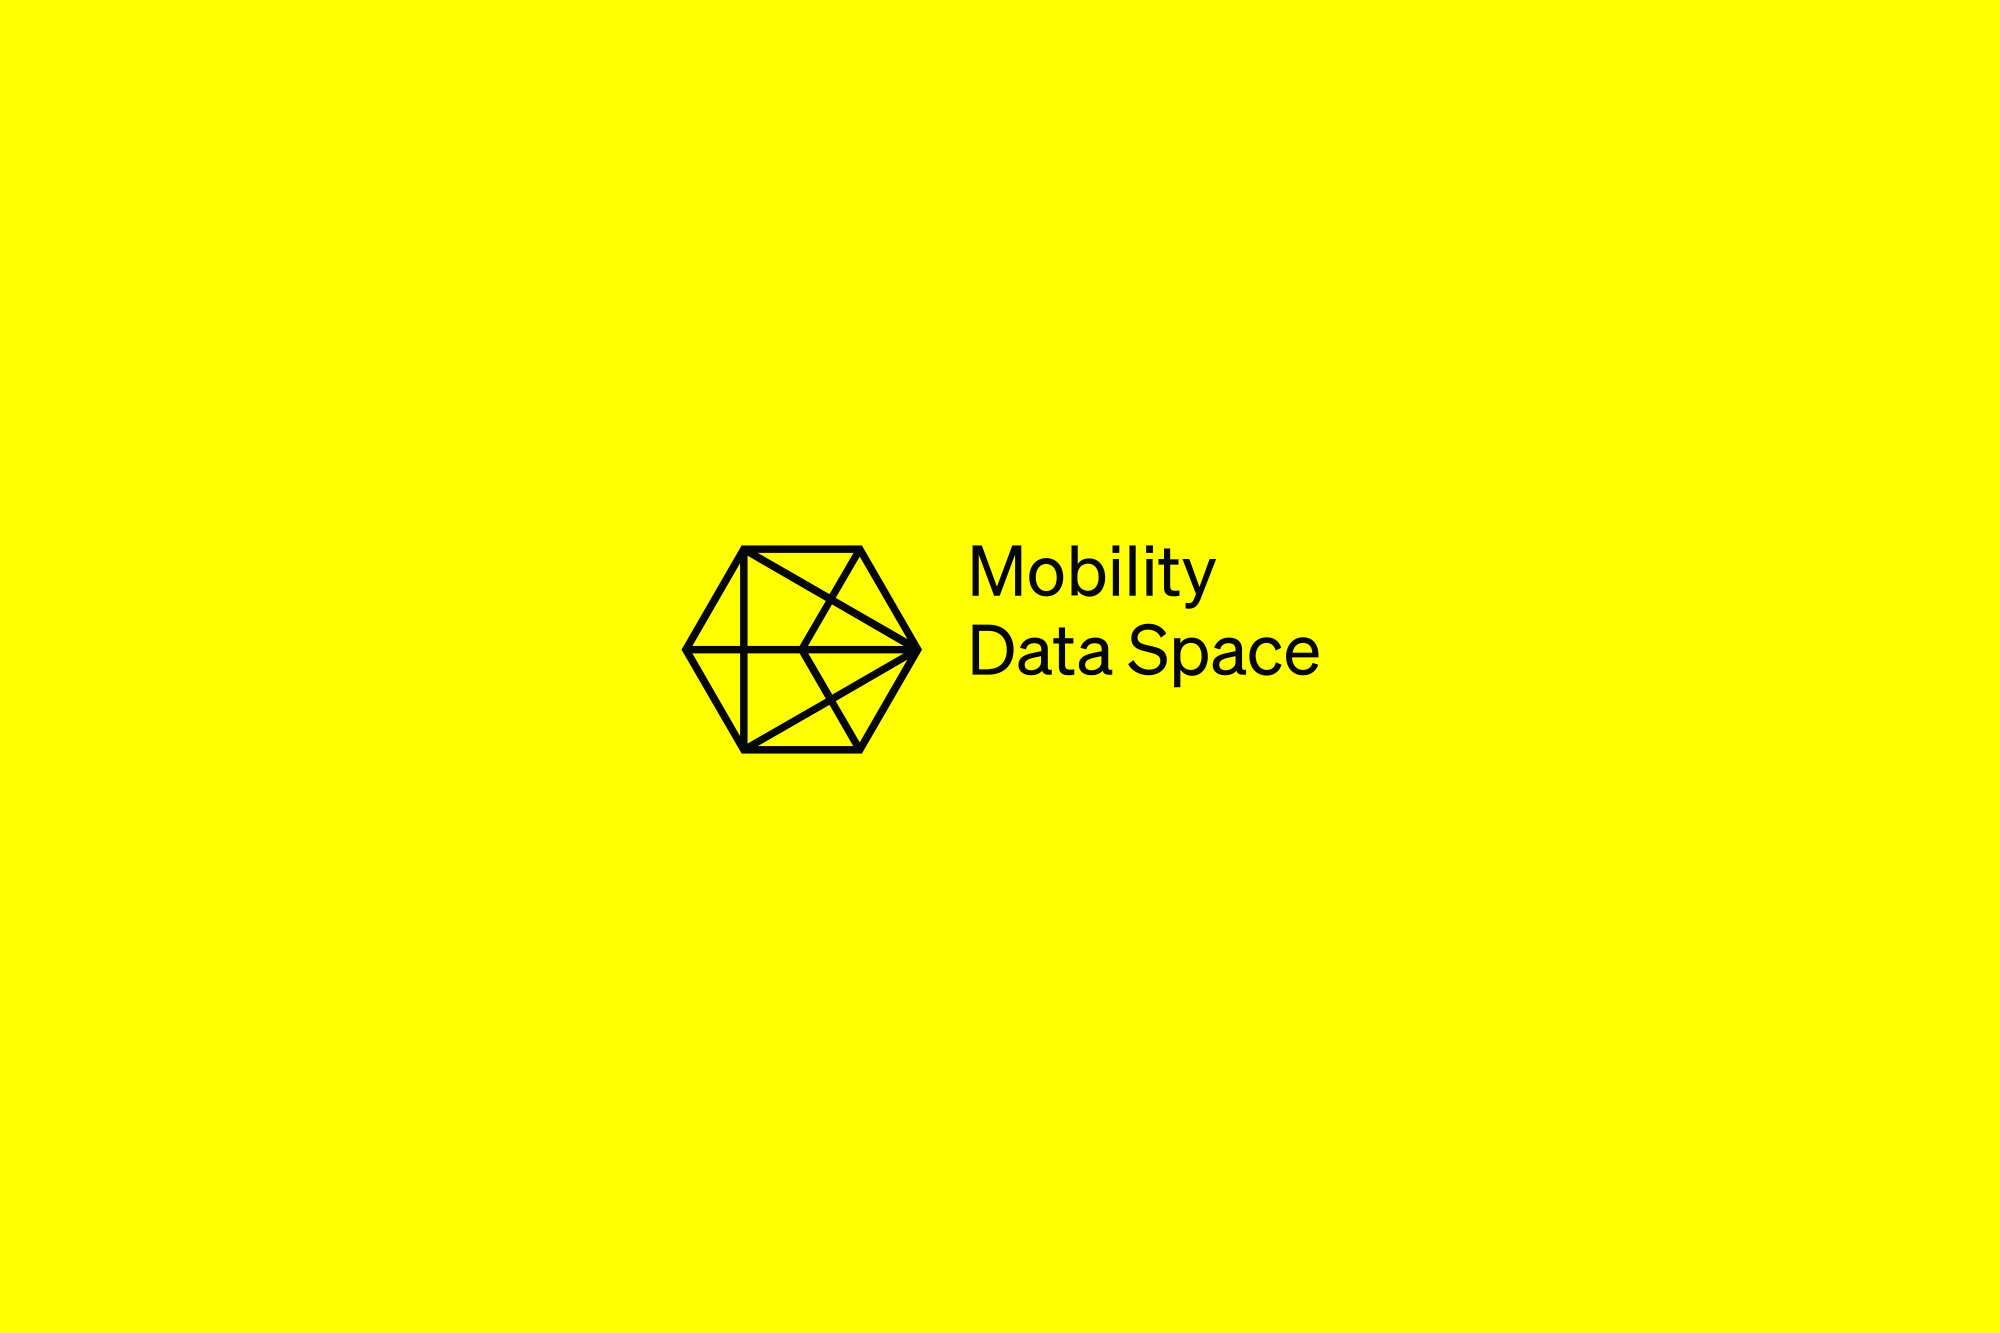 Gif animation of the Mobility Data Space logo in bright yellow and black